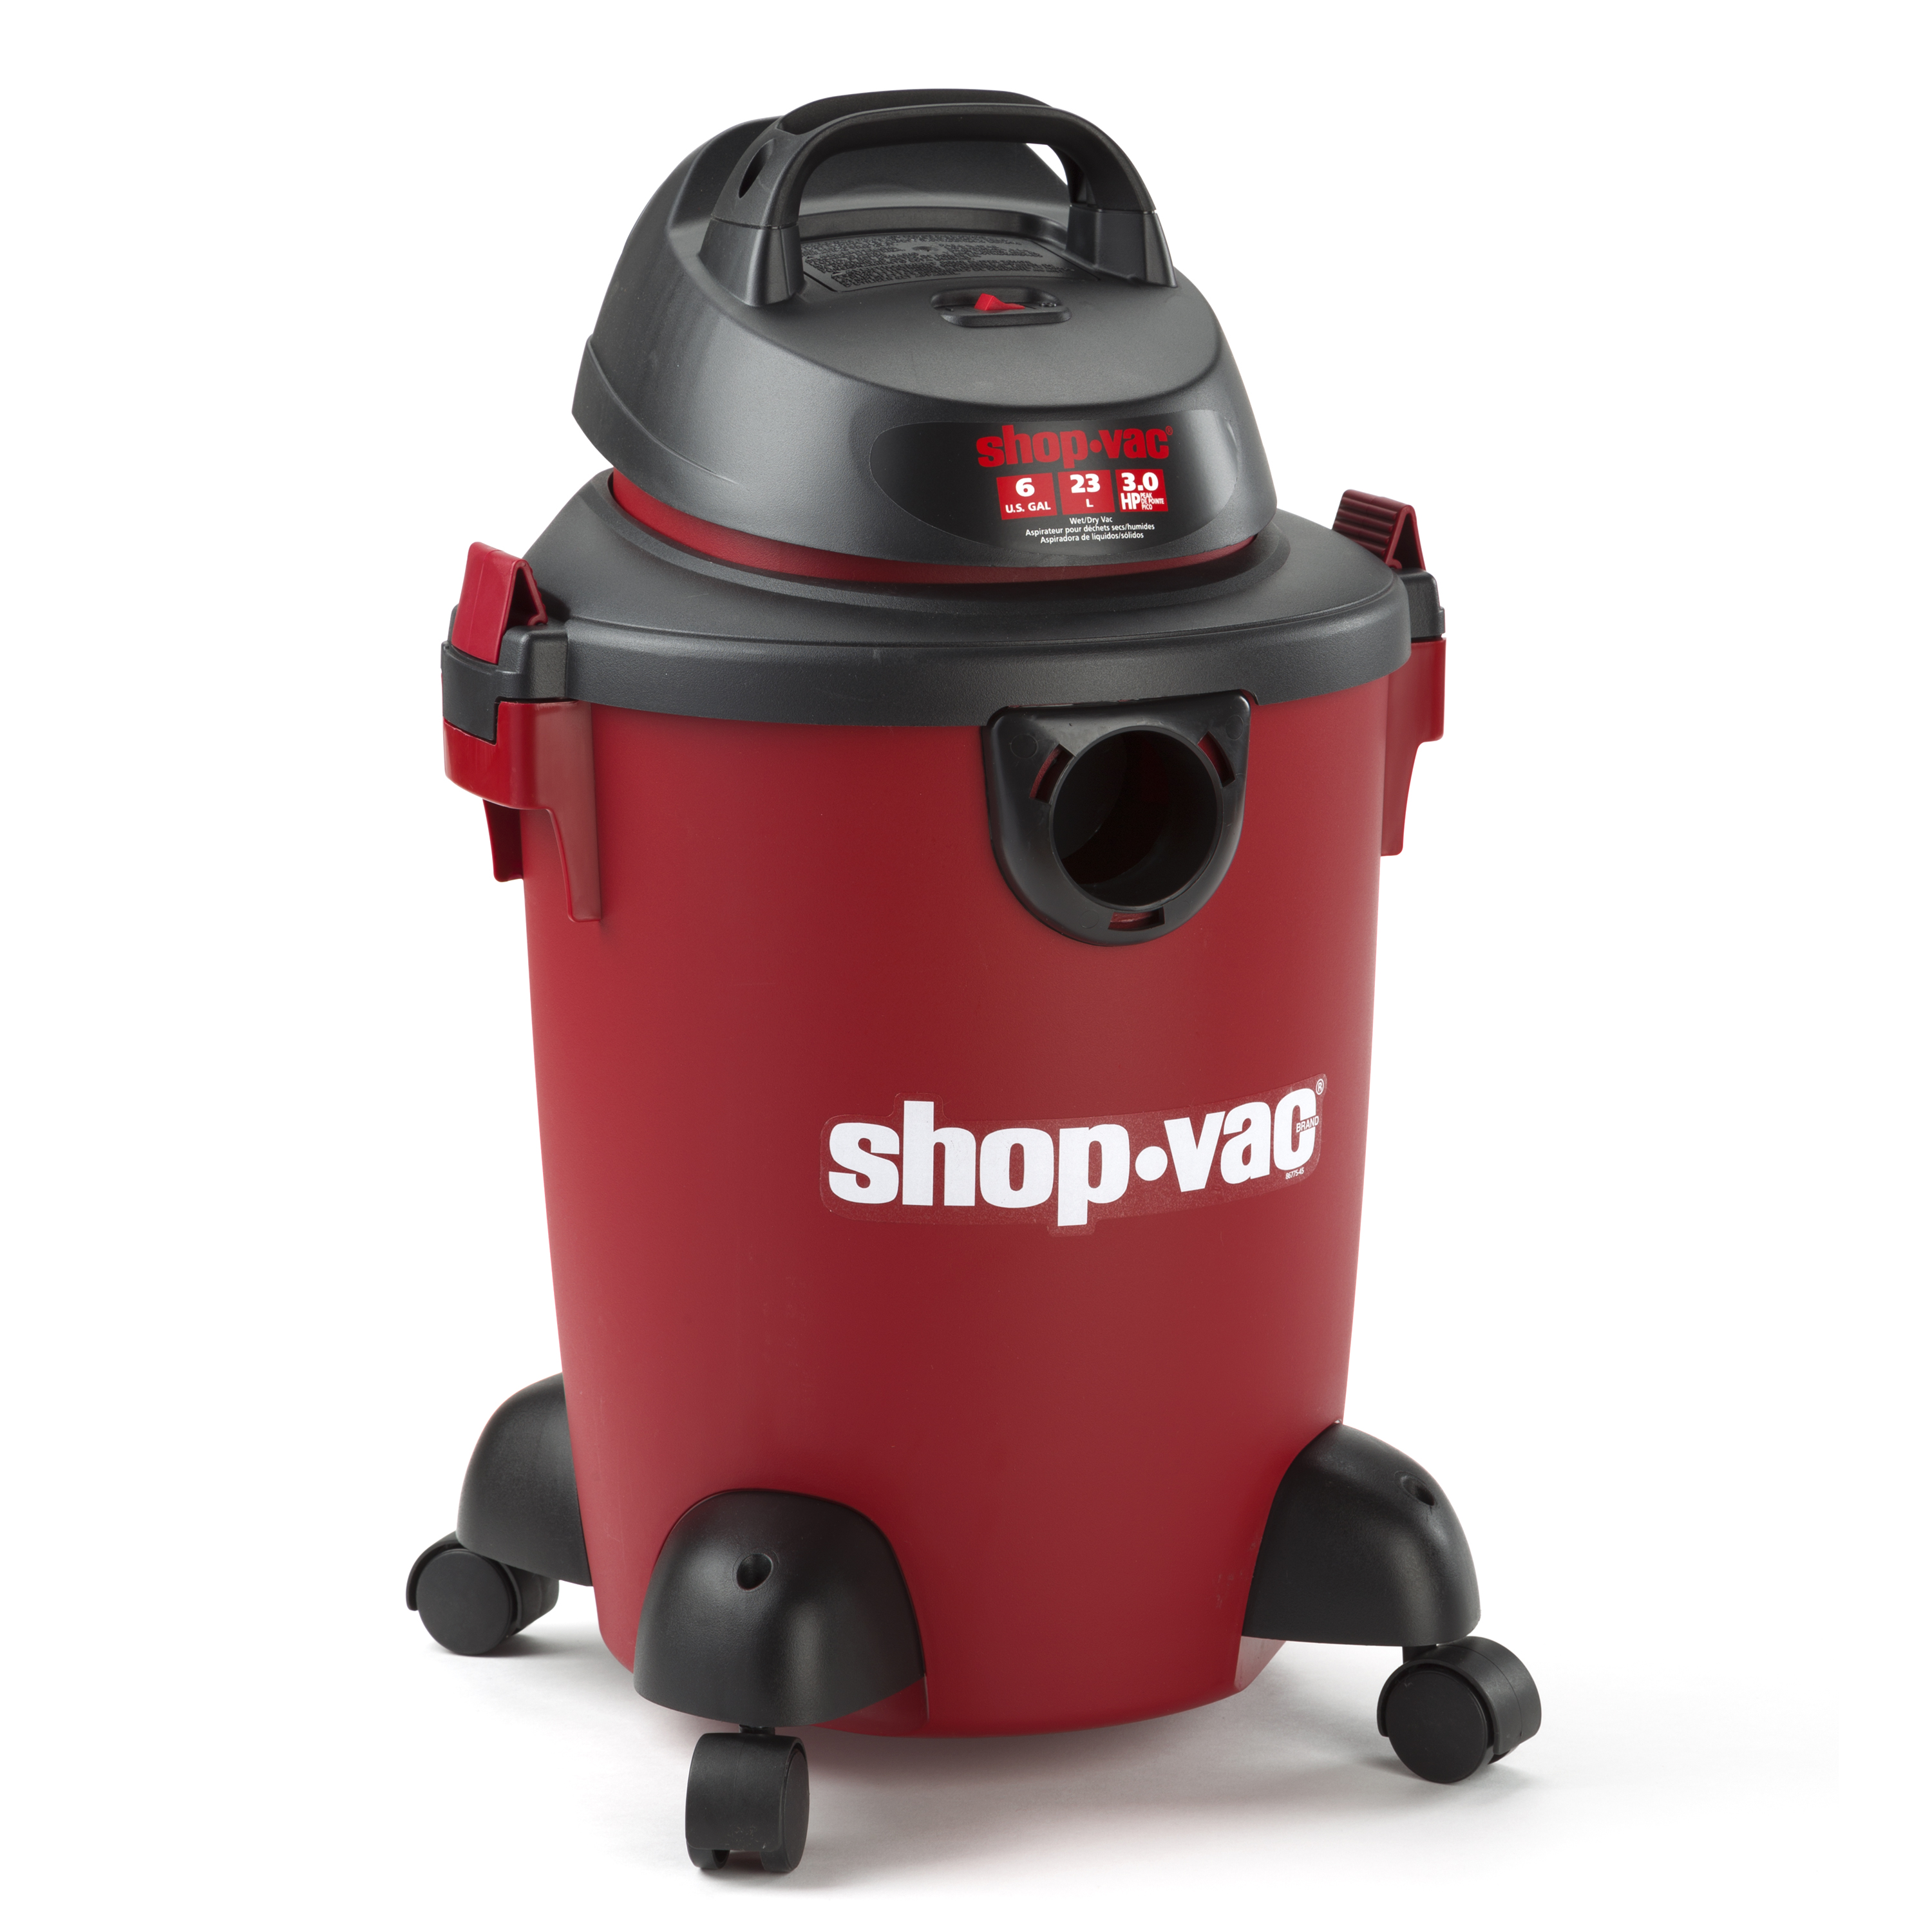 Shop-Vac 6 Gallon 3.0 Peak HP Wet / Dry Vacuum with Accessories and Casters - image 2 of 8